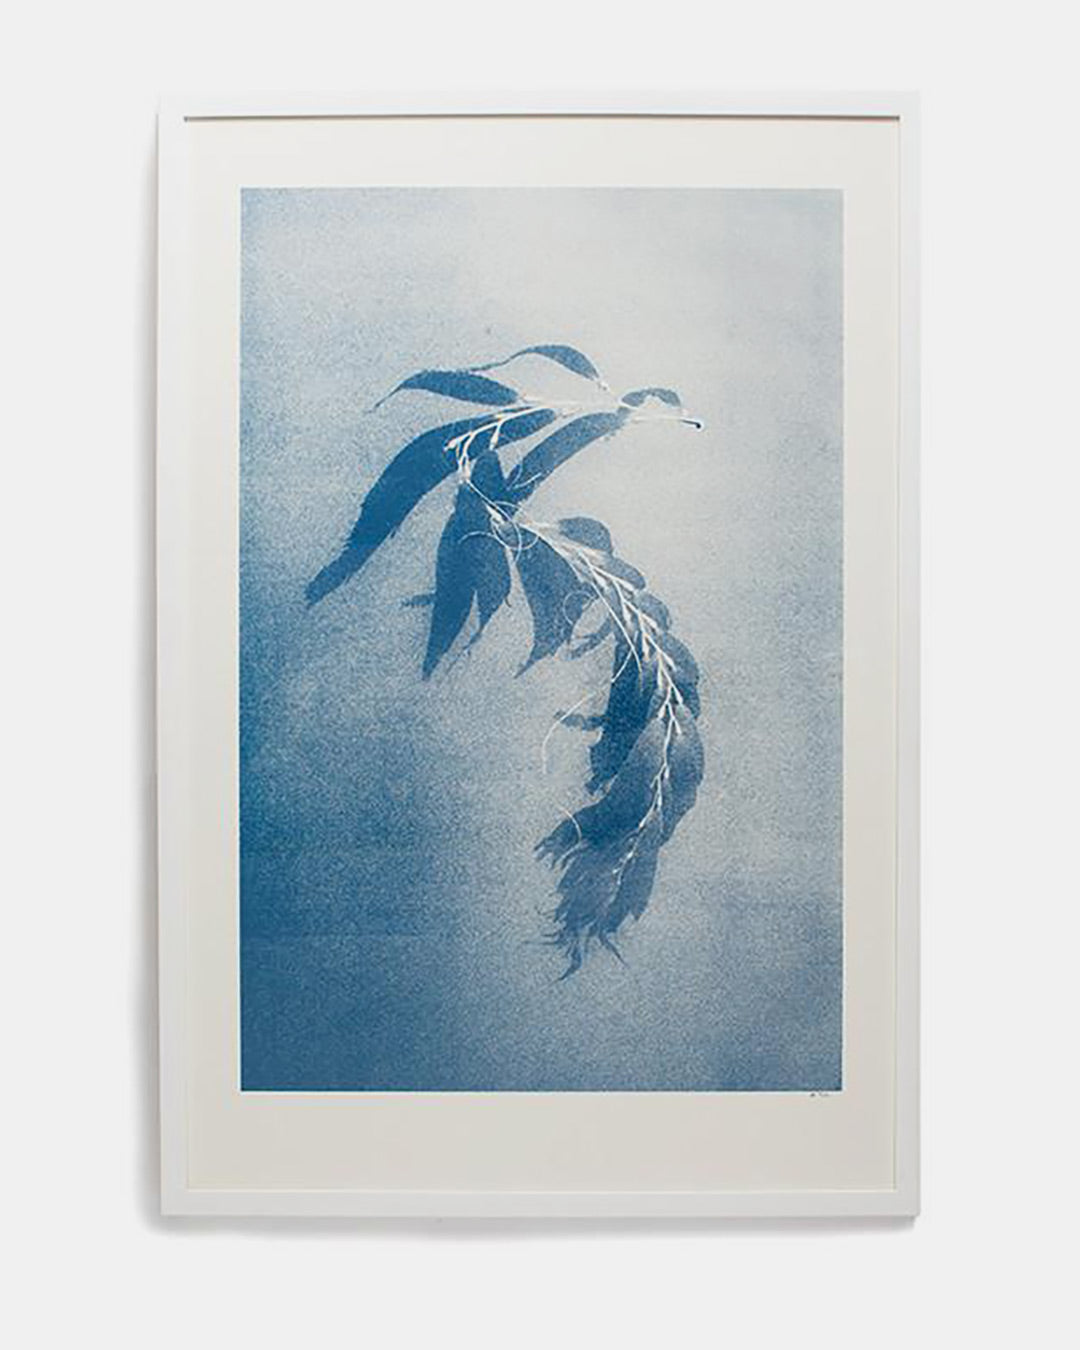 Will Adler 'Seaweed' Print, edition of 100 - Alchemy Works